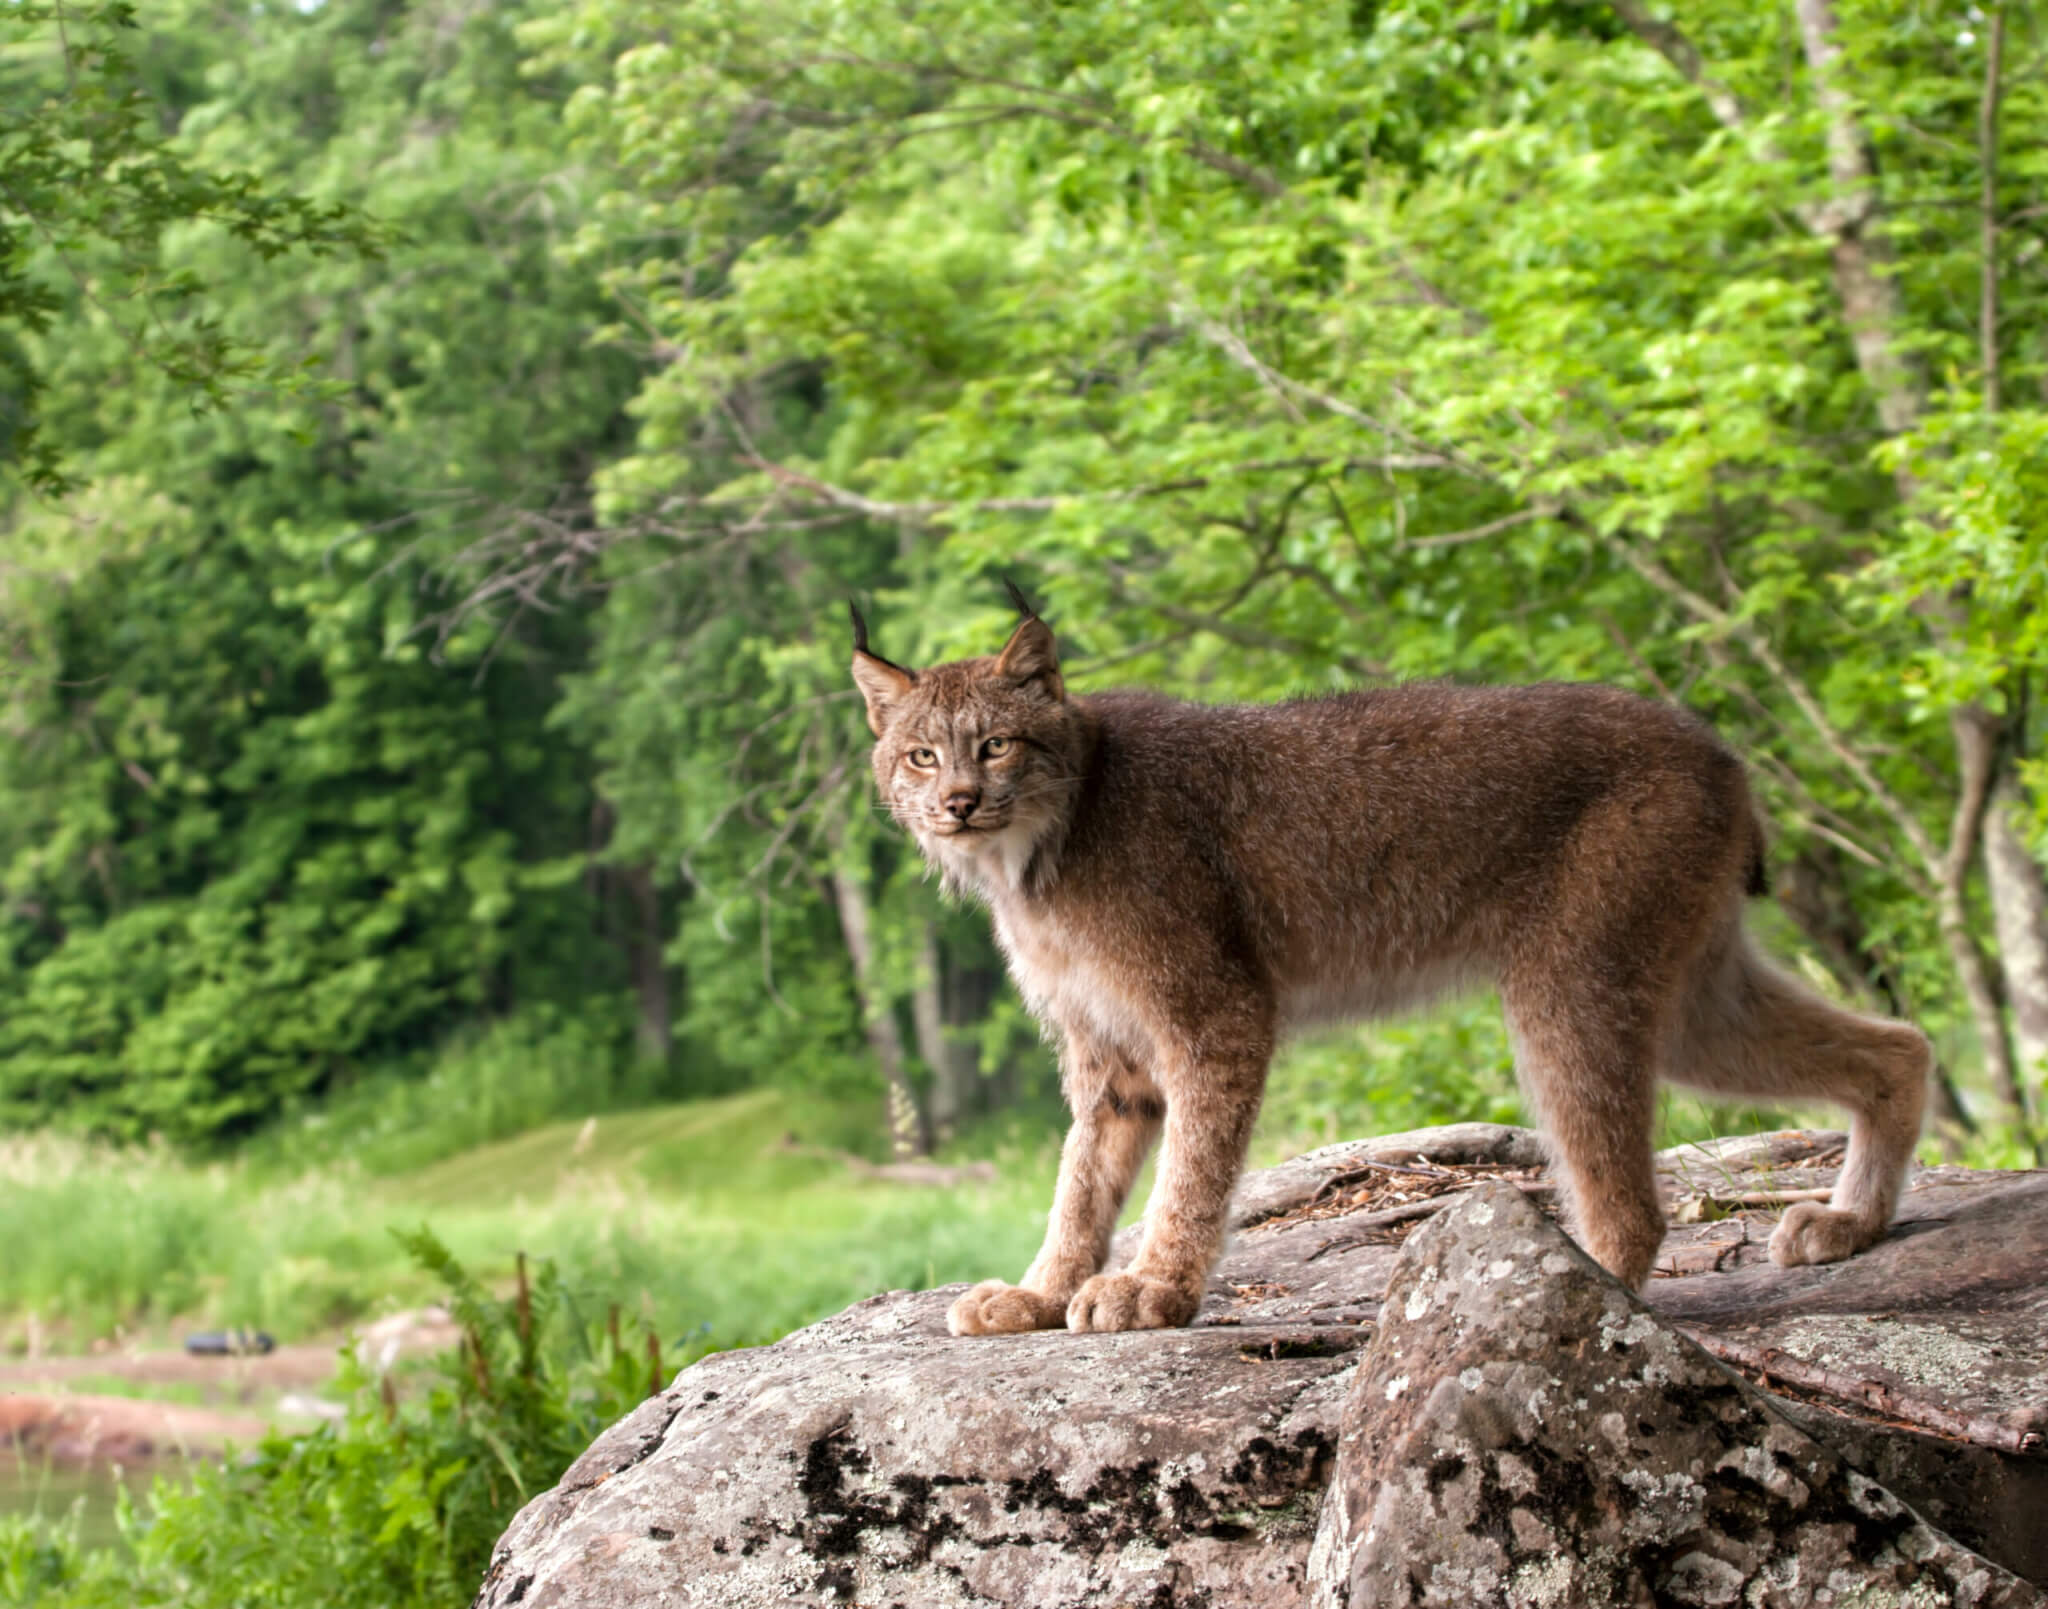 Canadian lynx making eye contact while standing on a boulder near a forest